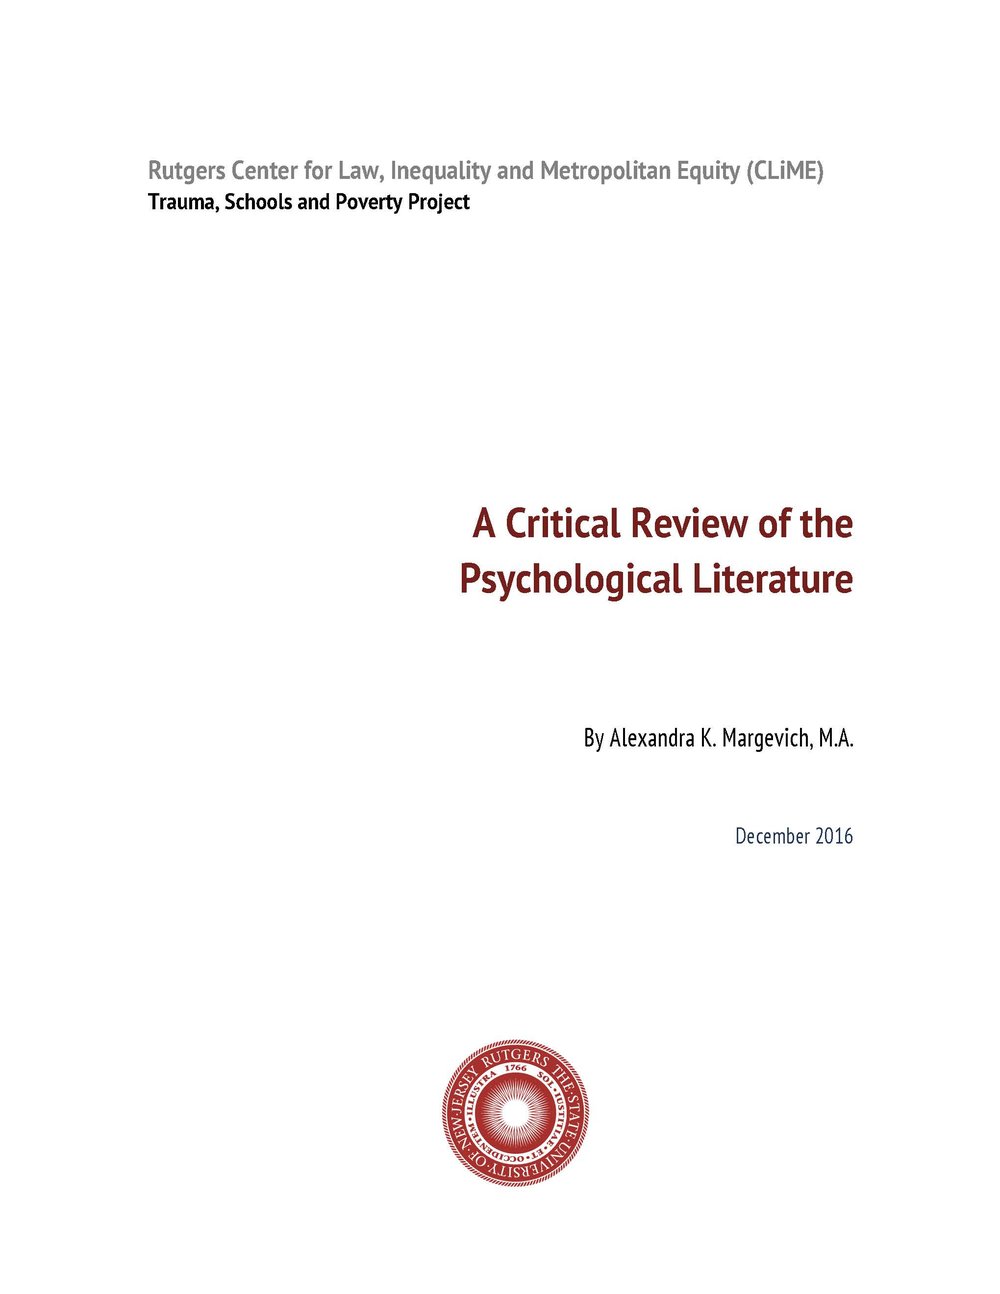 CLiME+TSP+A+Critical+Review+of+the+Psychological+Literature_Page_01.jpg